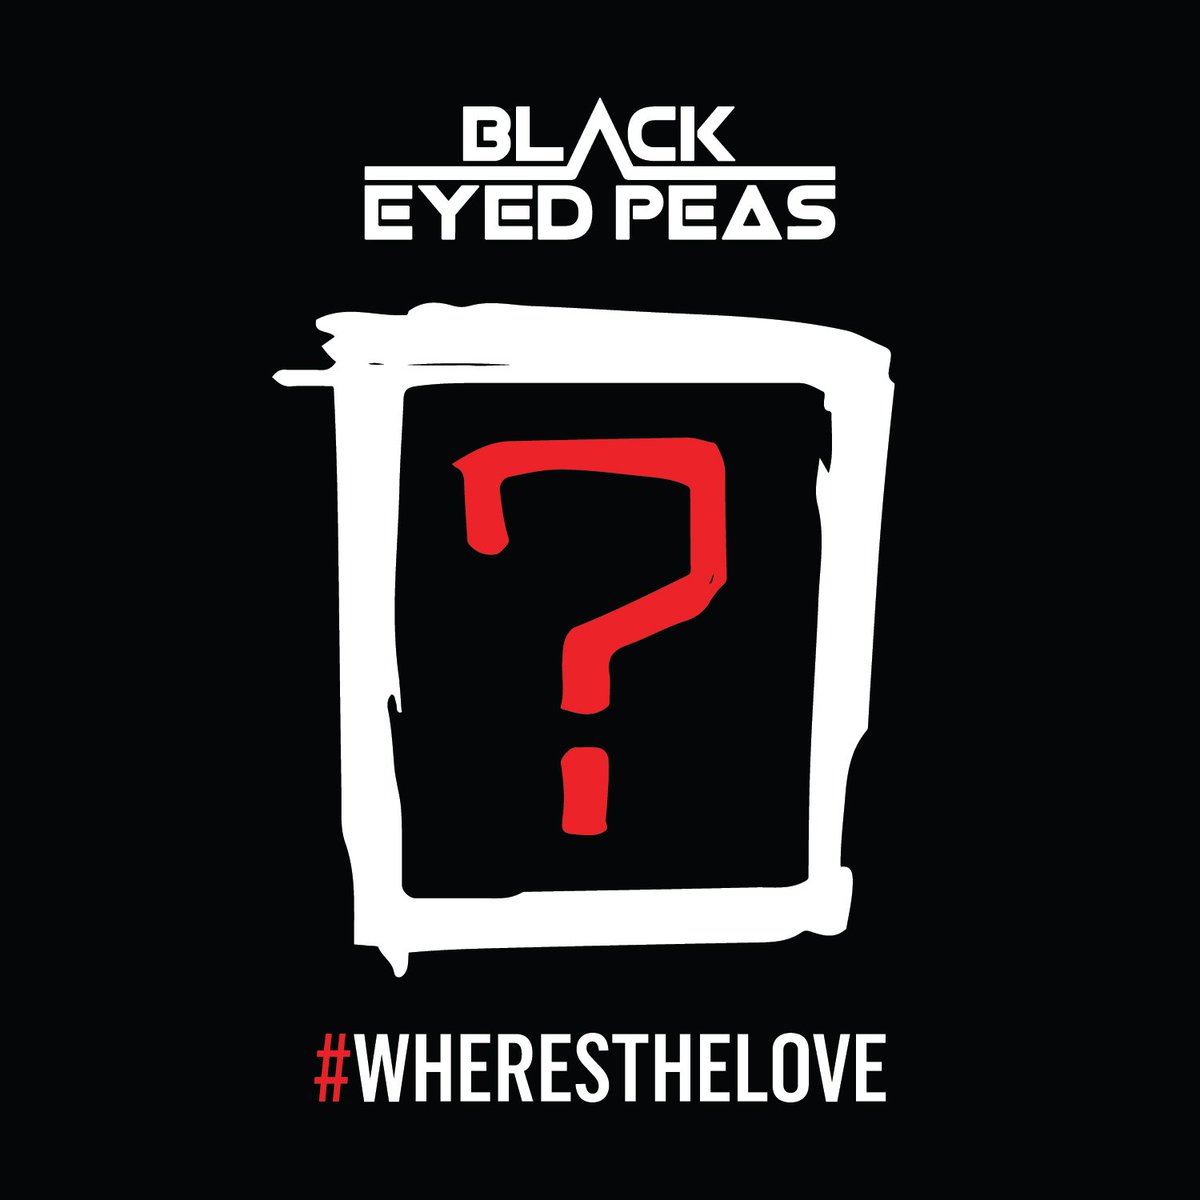 The question is.. #WHERESTHELOVE [?] @bep
Listen: https://t.co/OhWhFp5JWL
Watch: https://t.co/UJlu71croV https://t.co/mgjXMYHHGS